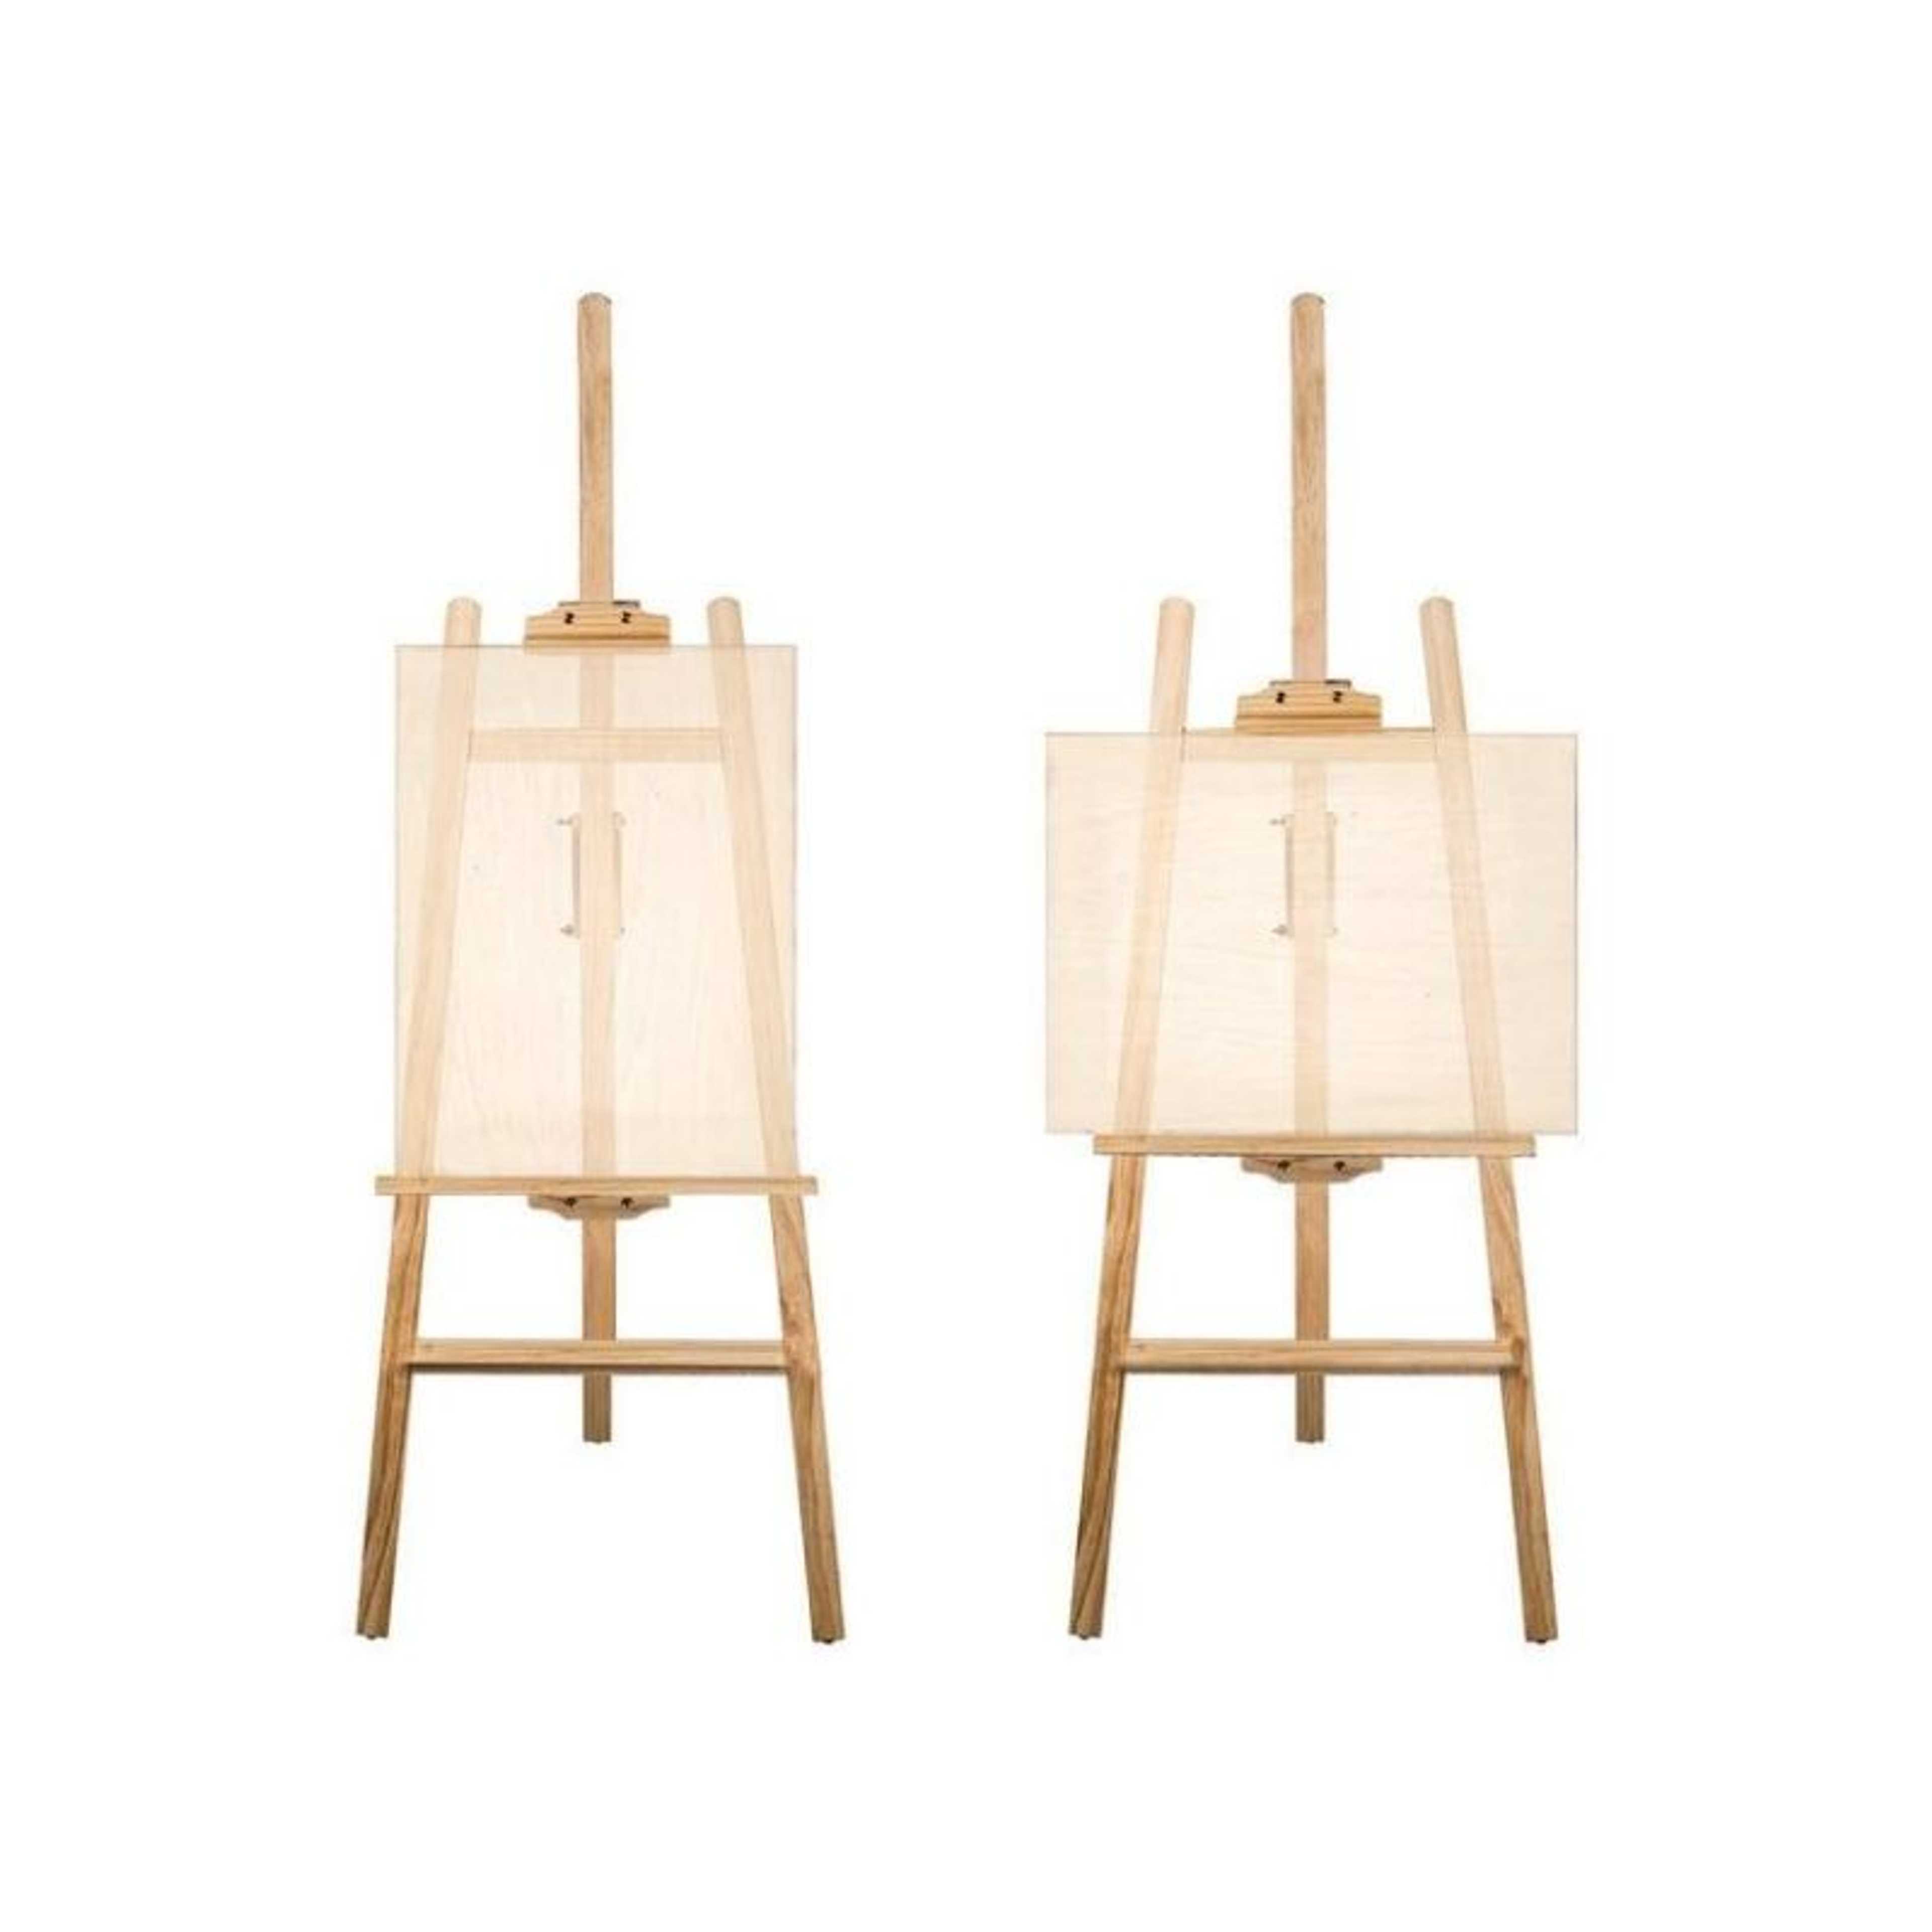 Wooden Studio Easel Stand, Adjustable French A-Frame Tripod Floor Easel Stand, for Studio Hotel Art Display, Perfect for Student Outdoor/Indoor Painting, Drawing & Sketching